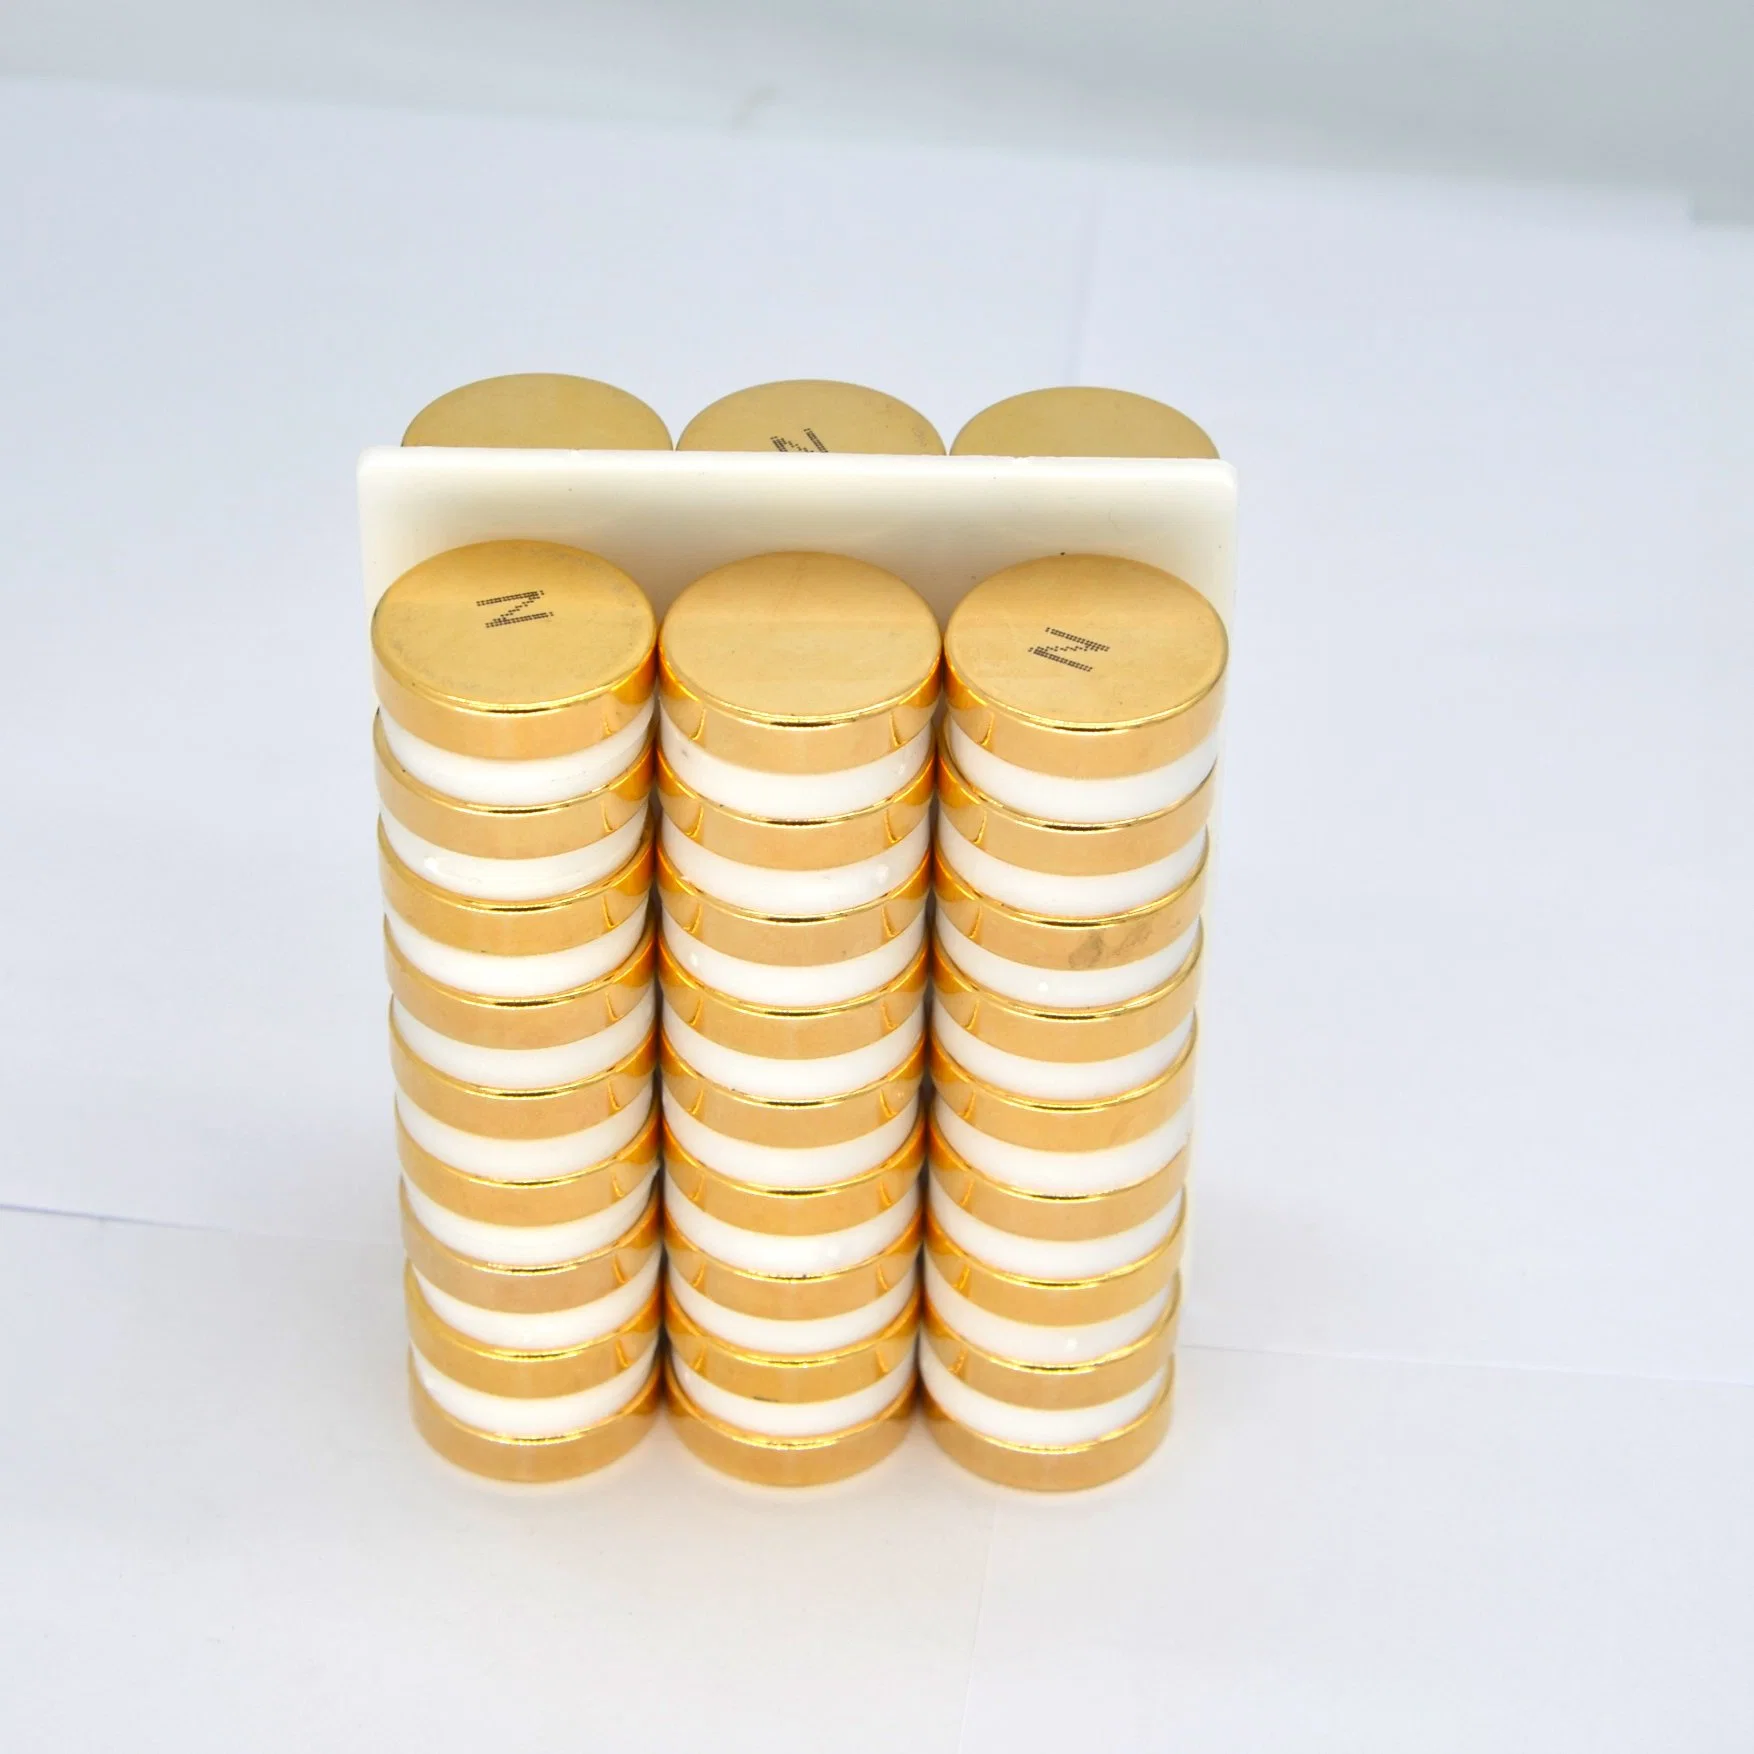 20 Years NdFeB Magnetic Factory Customize Coating Gold Coated Strong Magnet Disc Neodymium Permanent Magnet for Outer Parts